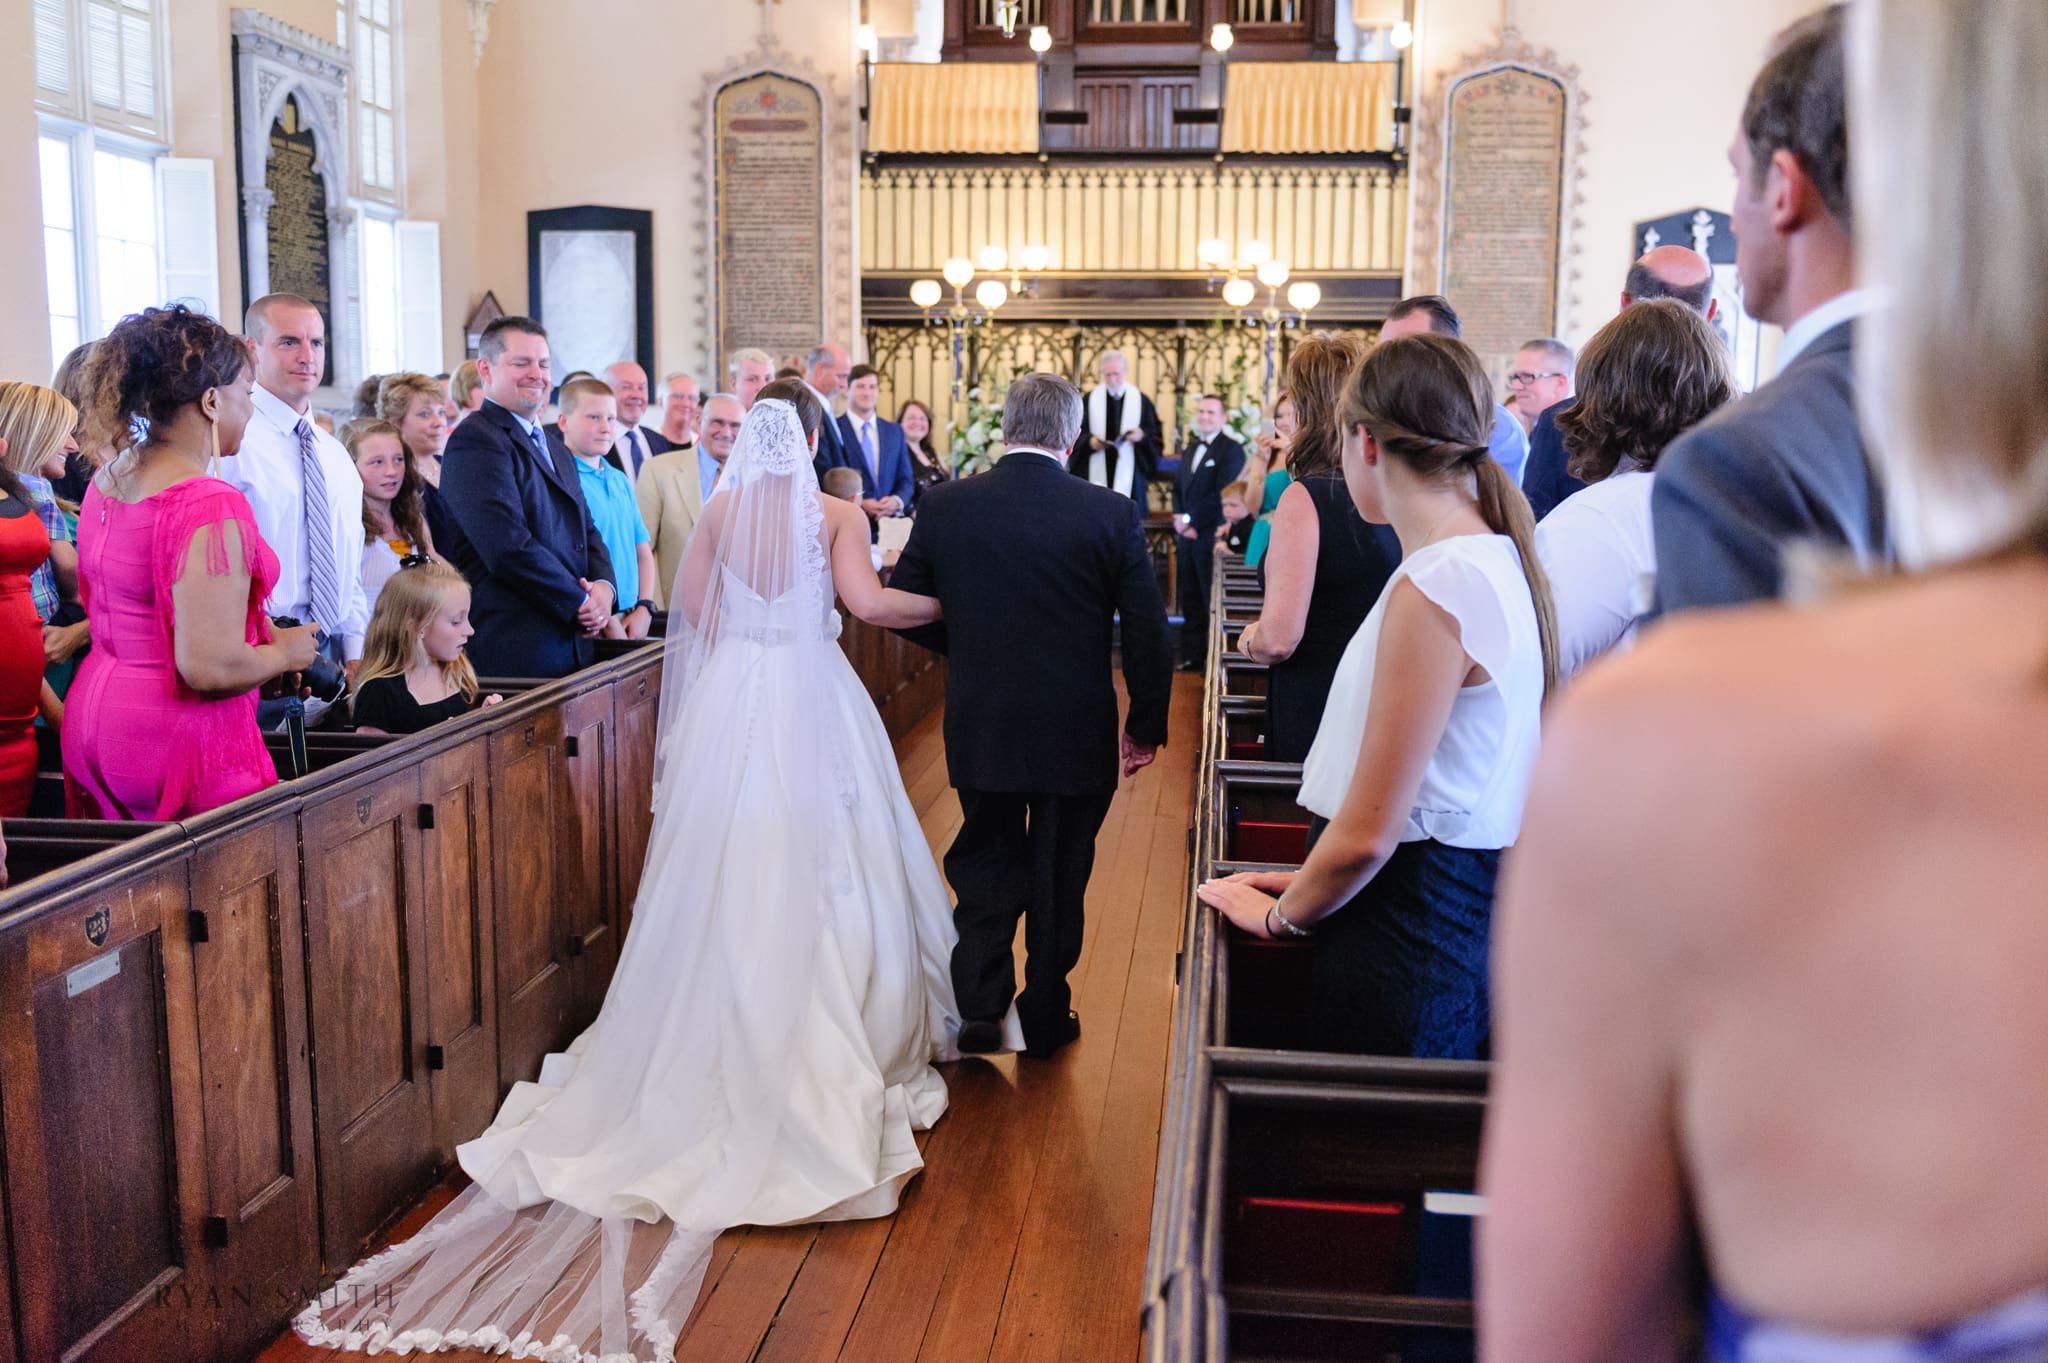 Father walking bride down the aisle  - French Huguenot Protestant Church